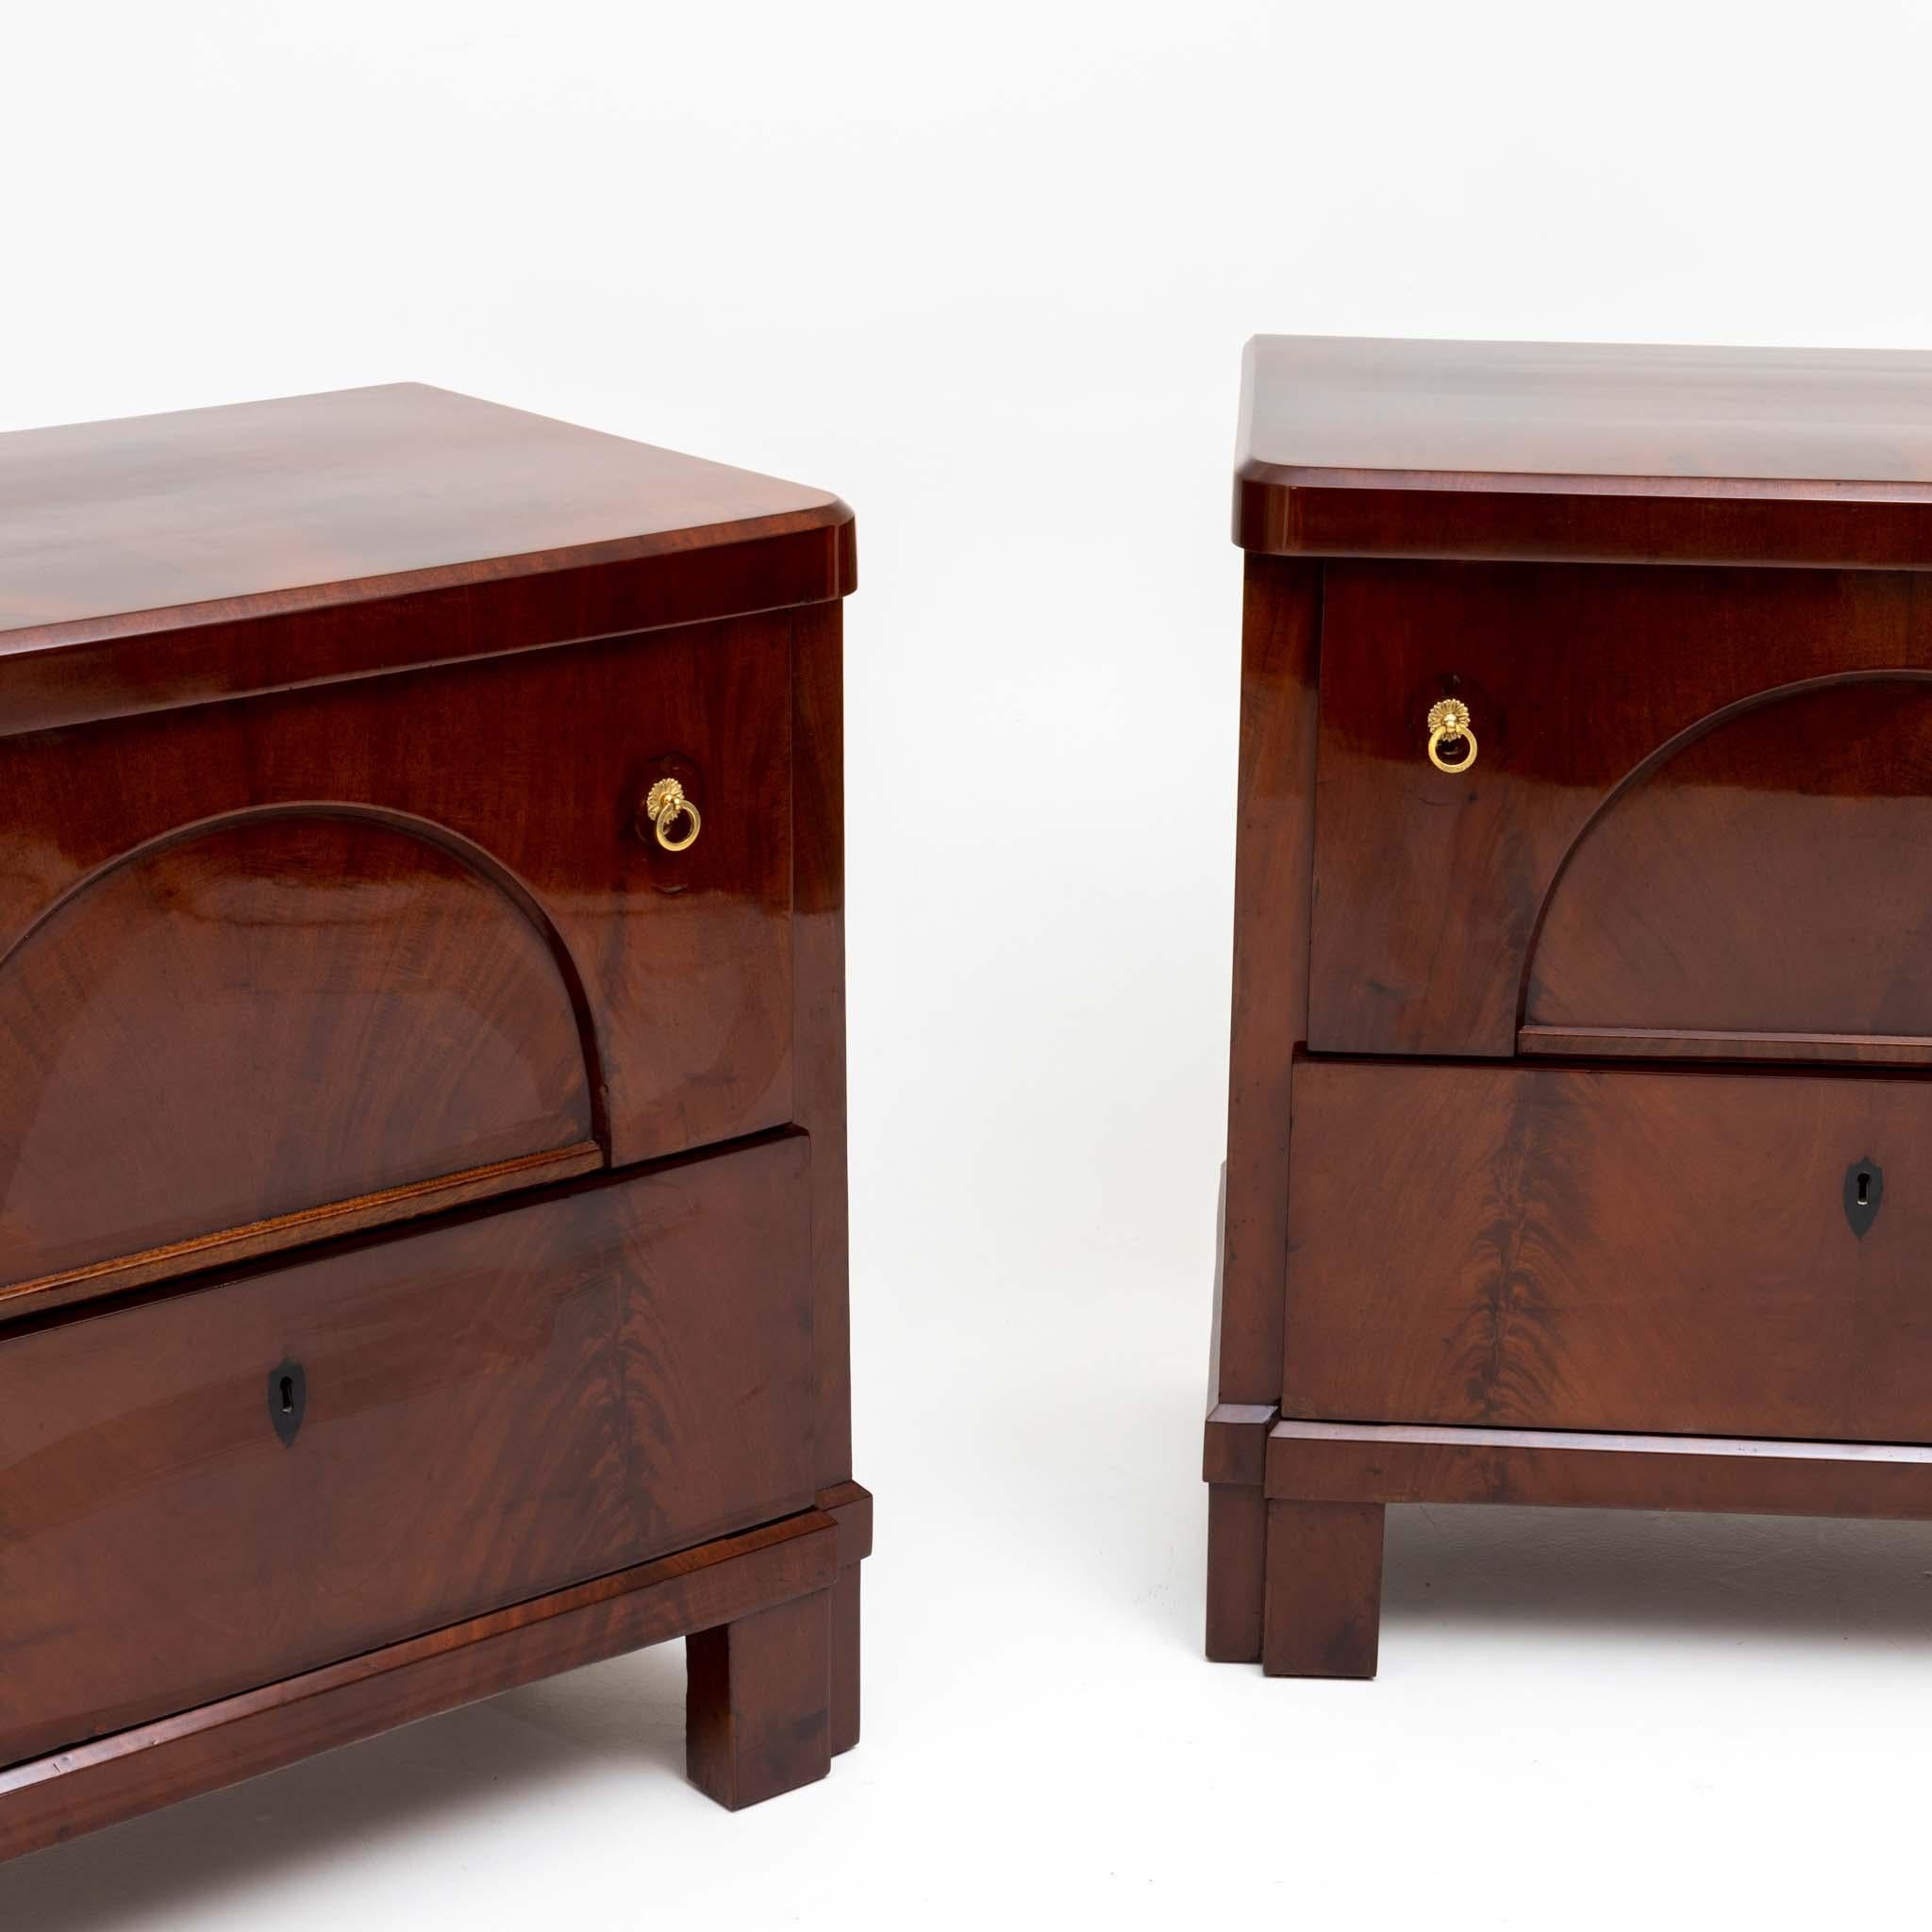 Pair of Biedermeier chests of drawers in mahogany veneered, with two deep drawers and segmental filling field. The chests of drawers were professionally restored and hand polished. The fittings are secondary.